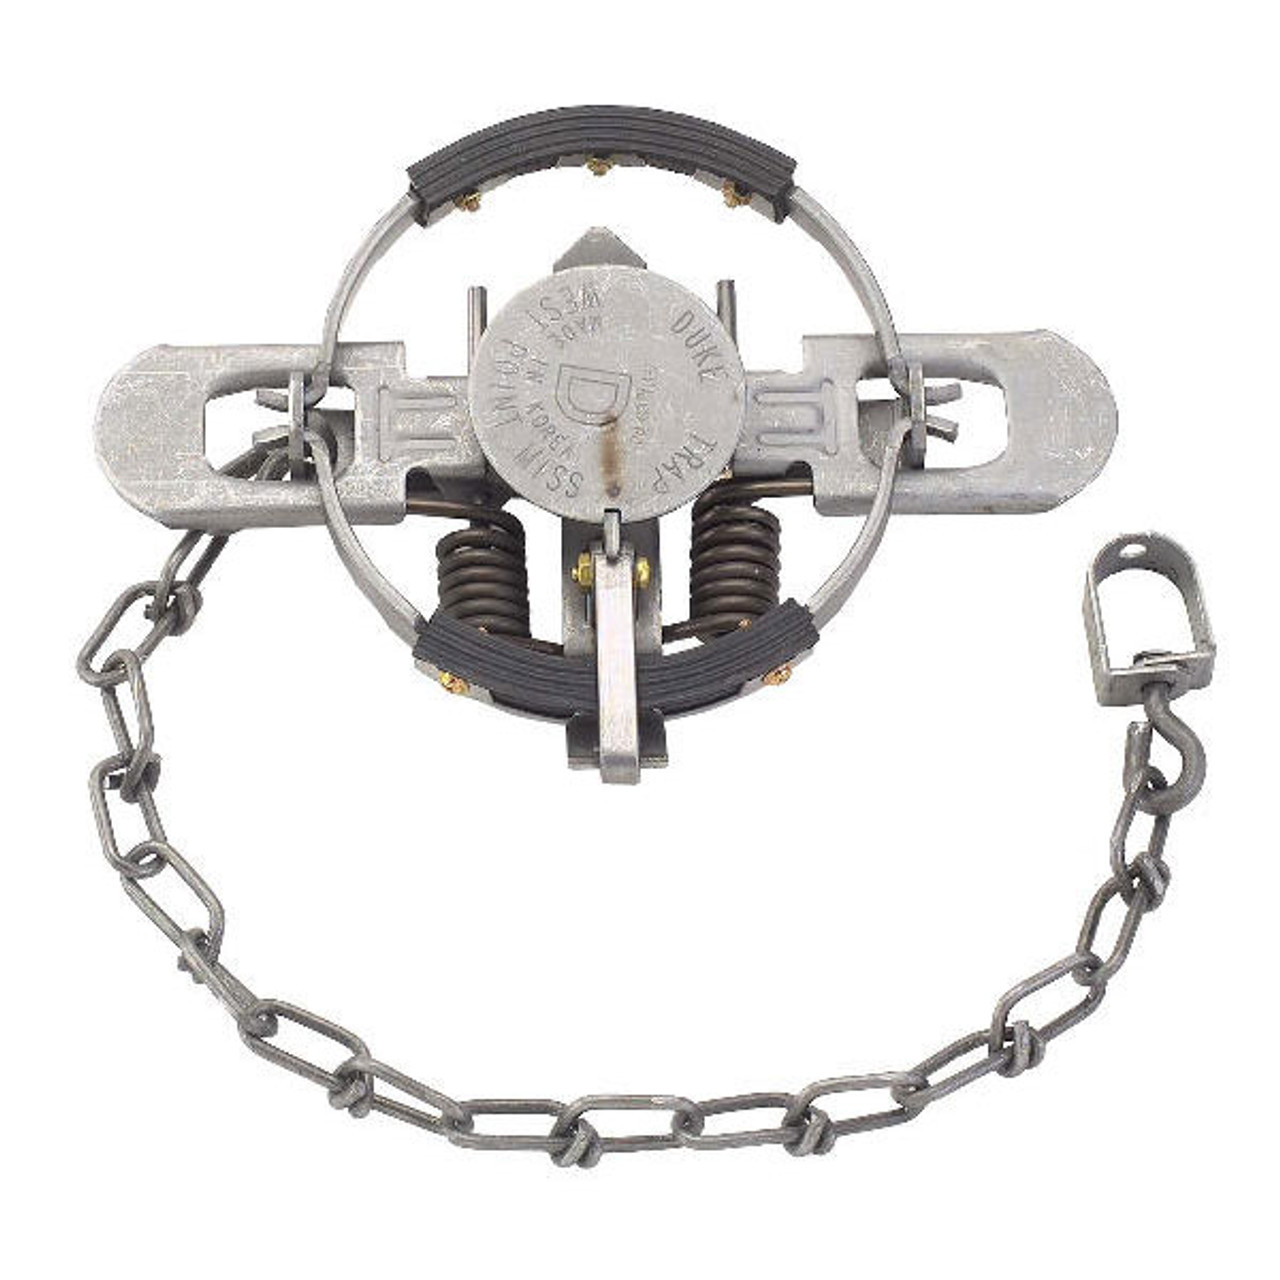 Duke Traps 10 In. Jaw Spread Steel Body Gripping Beaver, Bobcat, Coyote, &  Otter Trap - Power Townsend Company